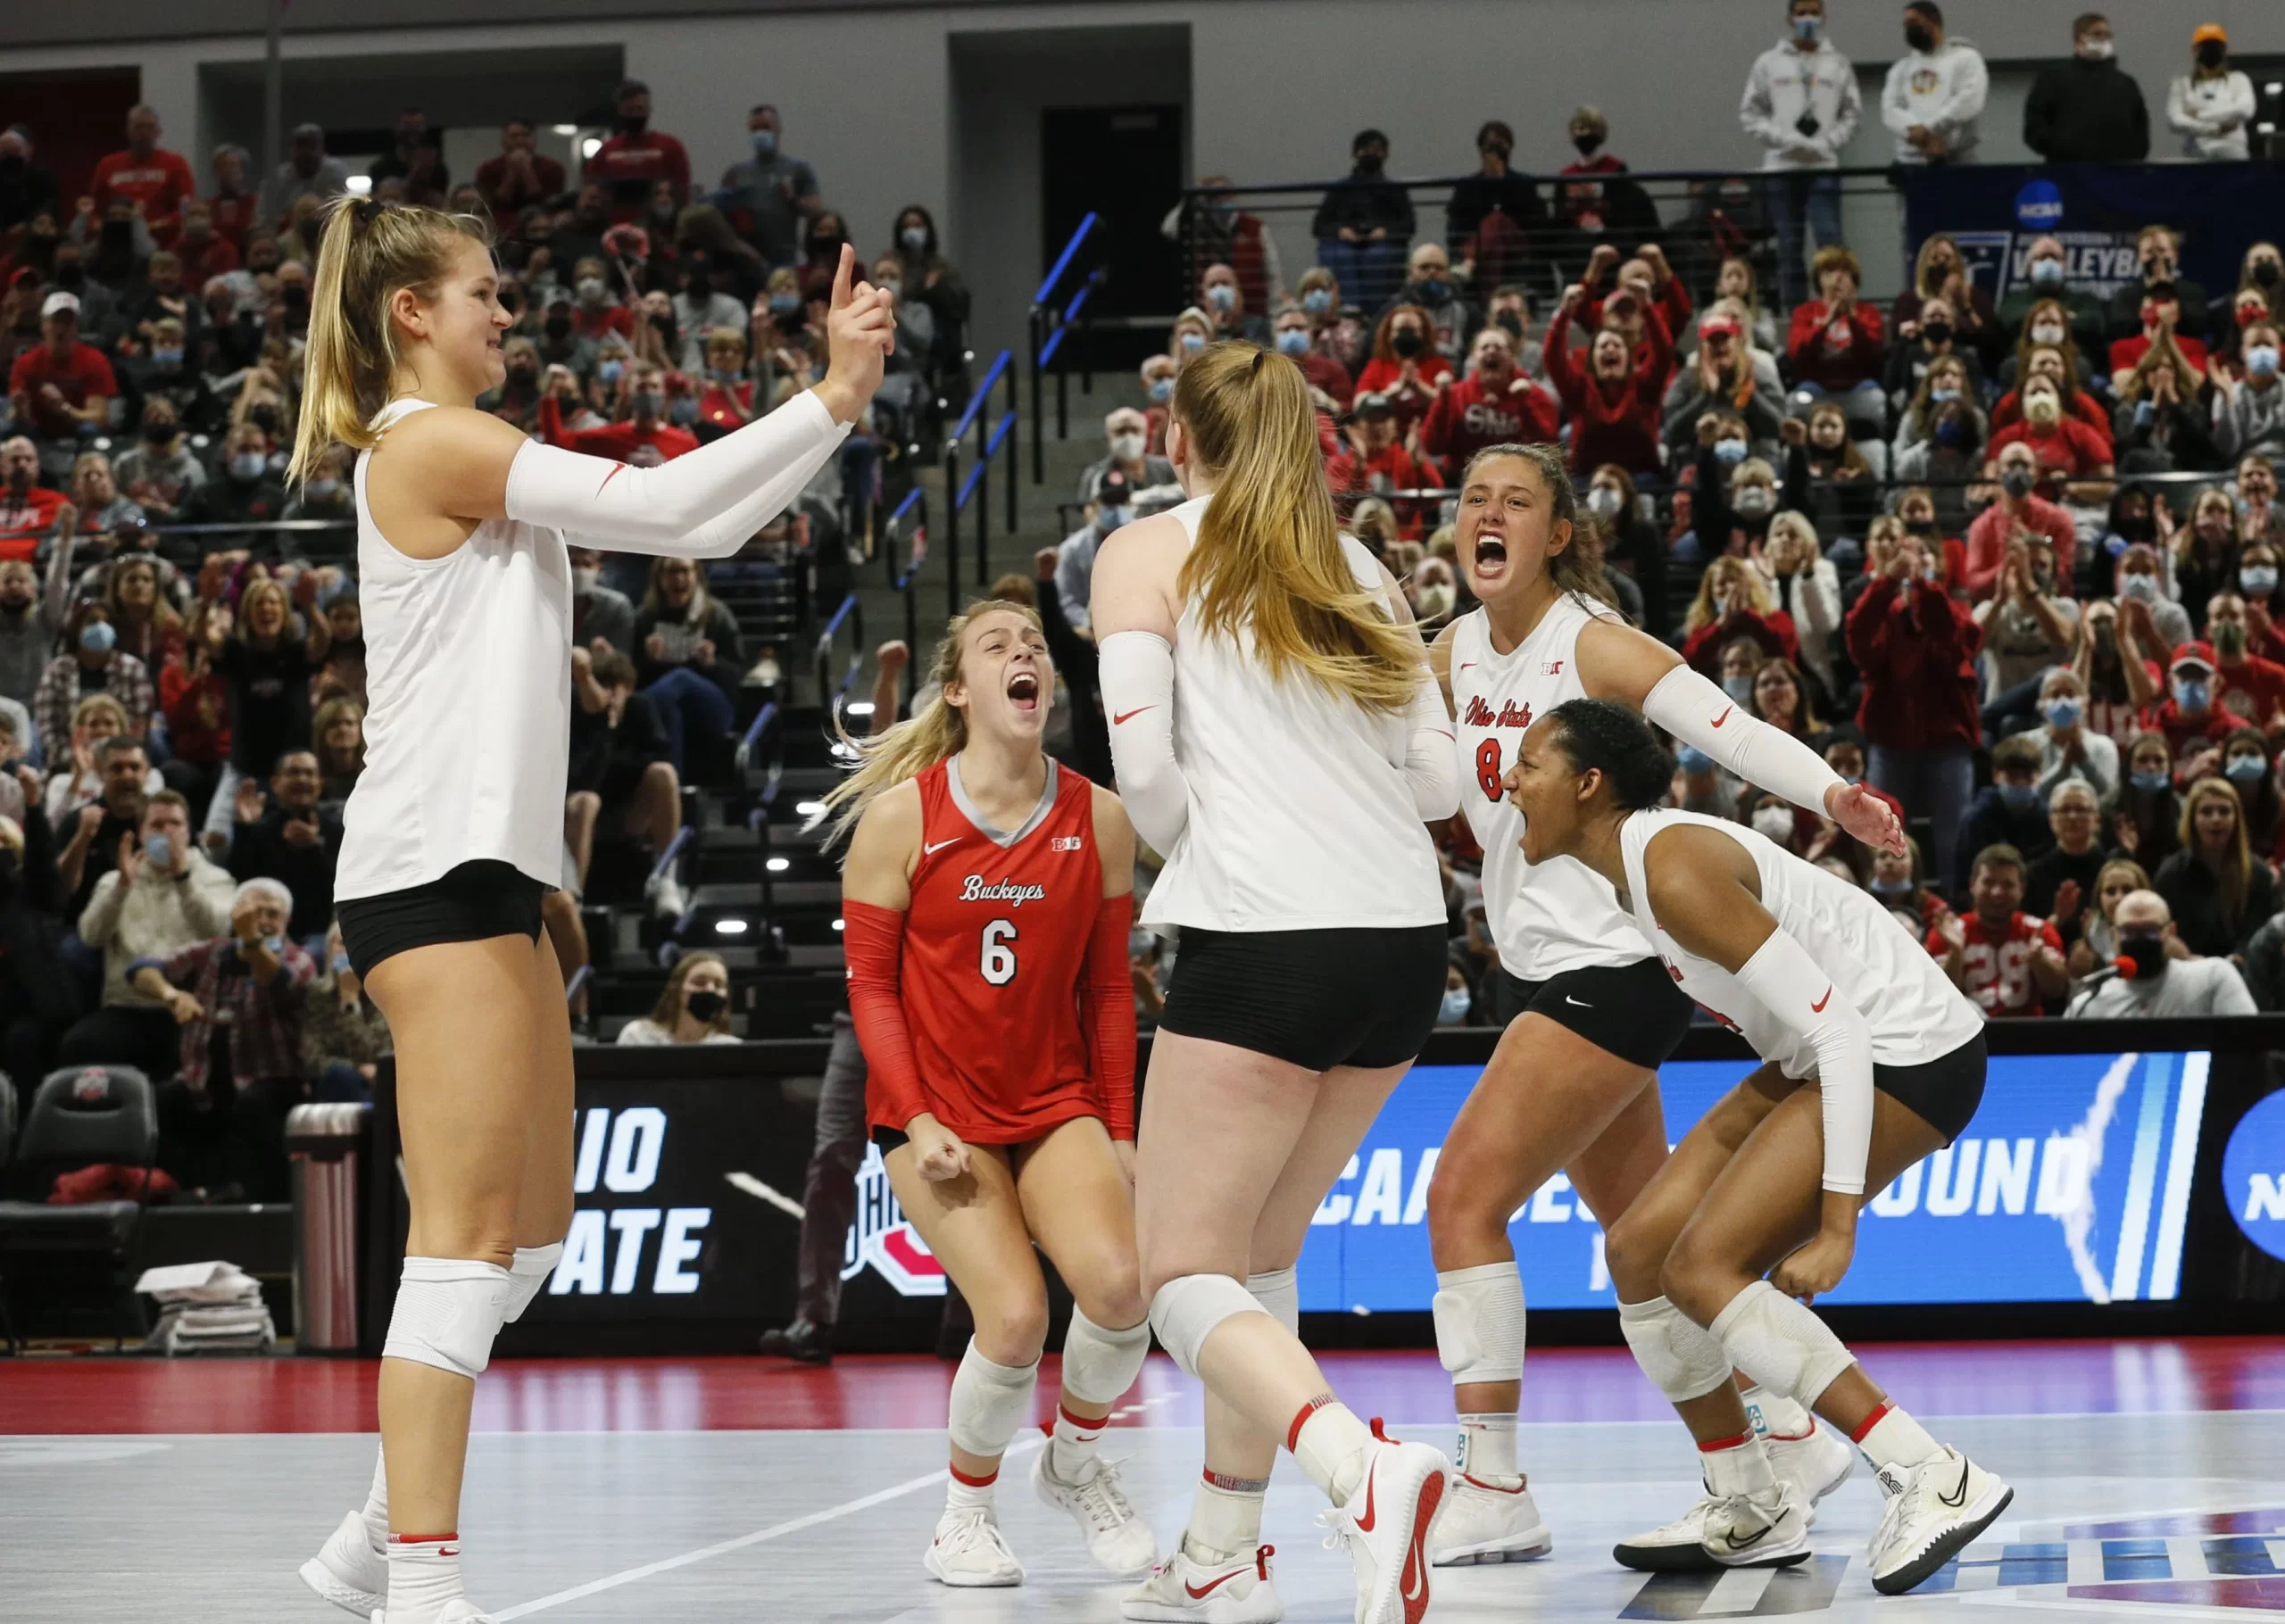 Ohio State Makes Third Consecutive NCAA Regionals Appearance